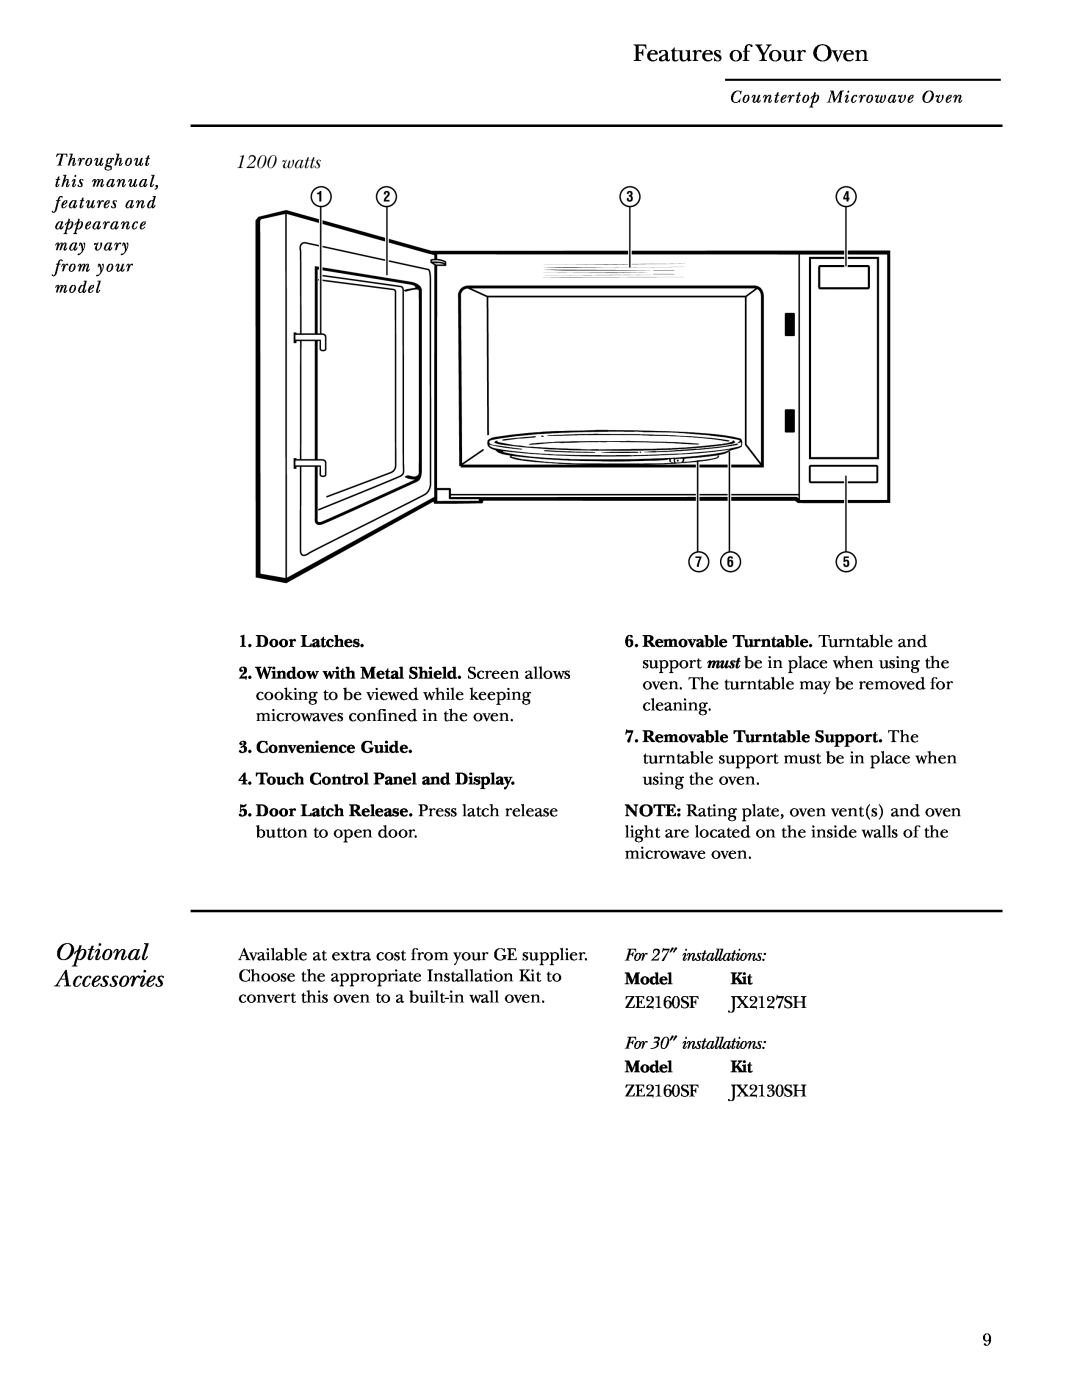 GE ZE2160 owner manual Features of Your Oven, Optional Accessories, watts 